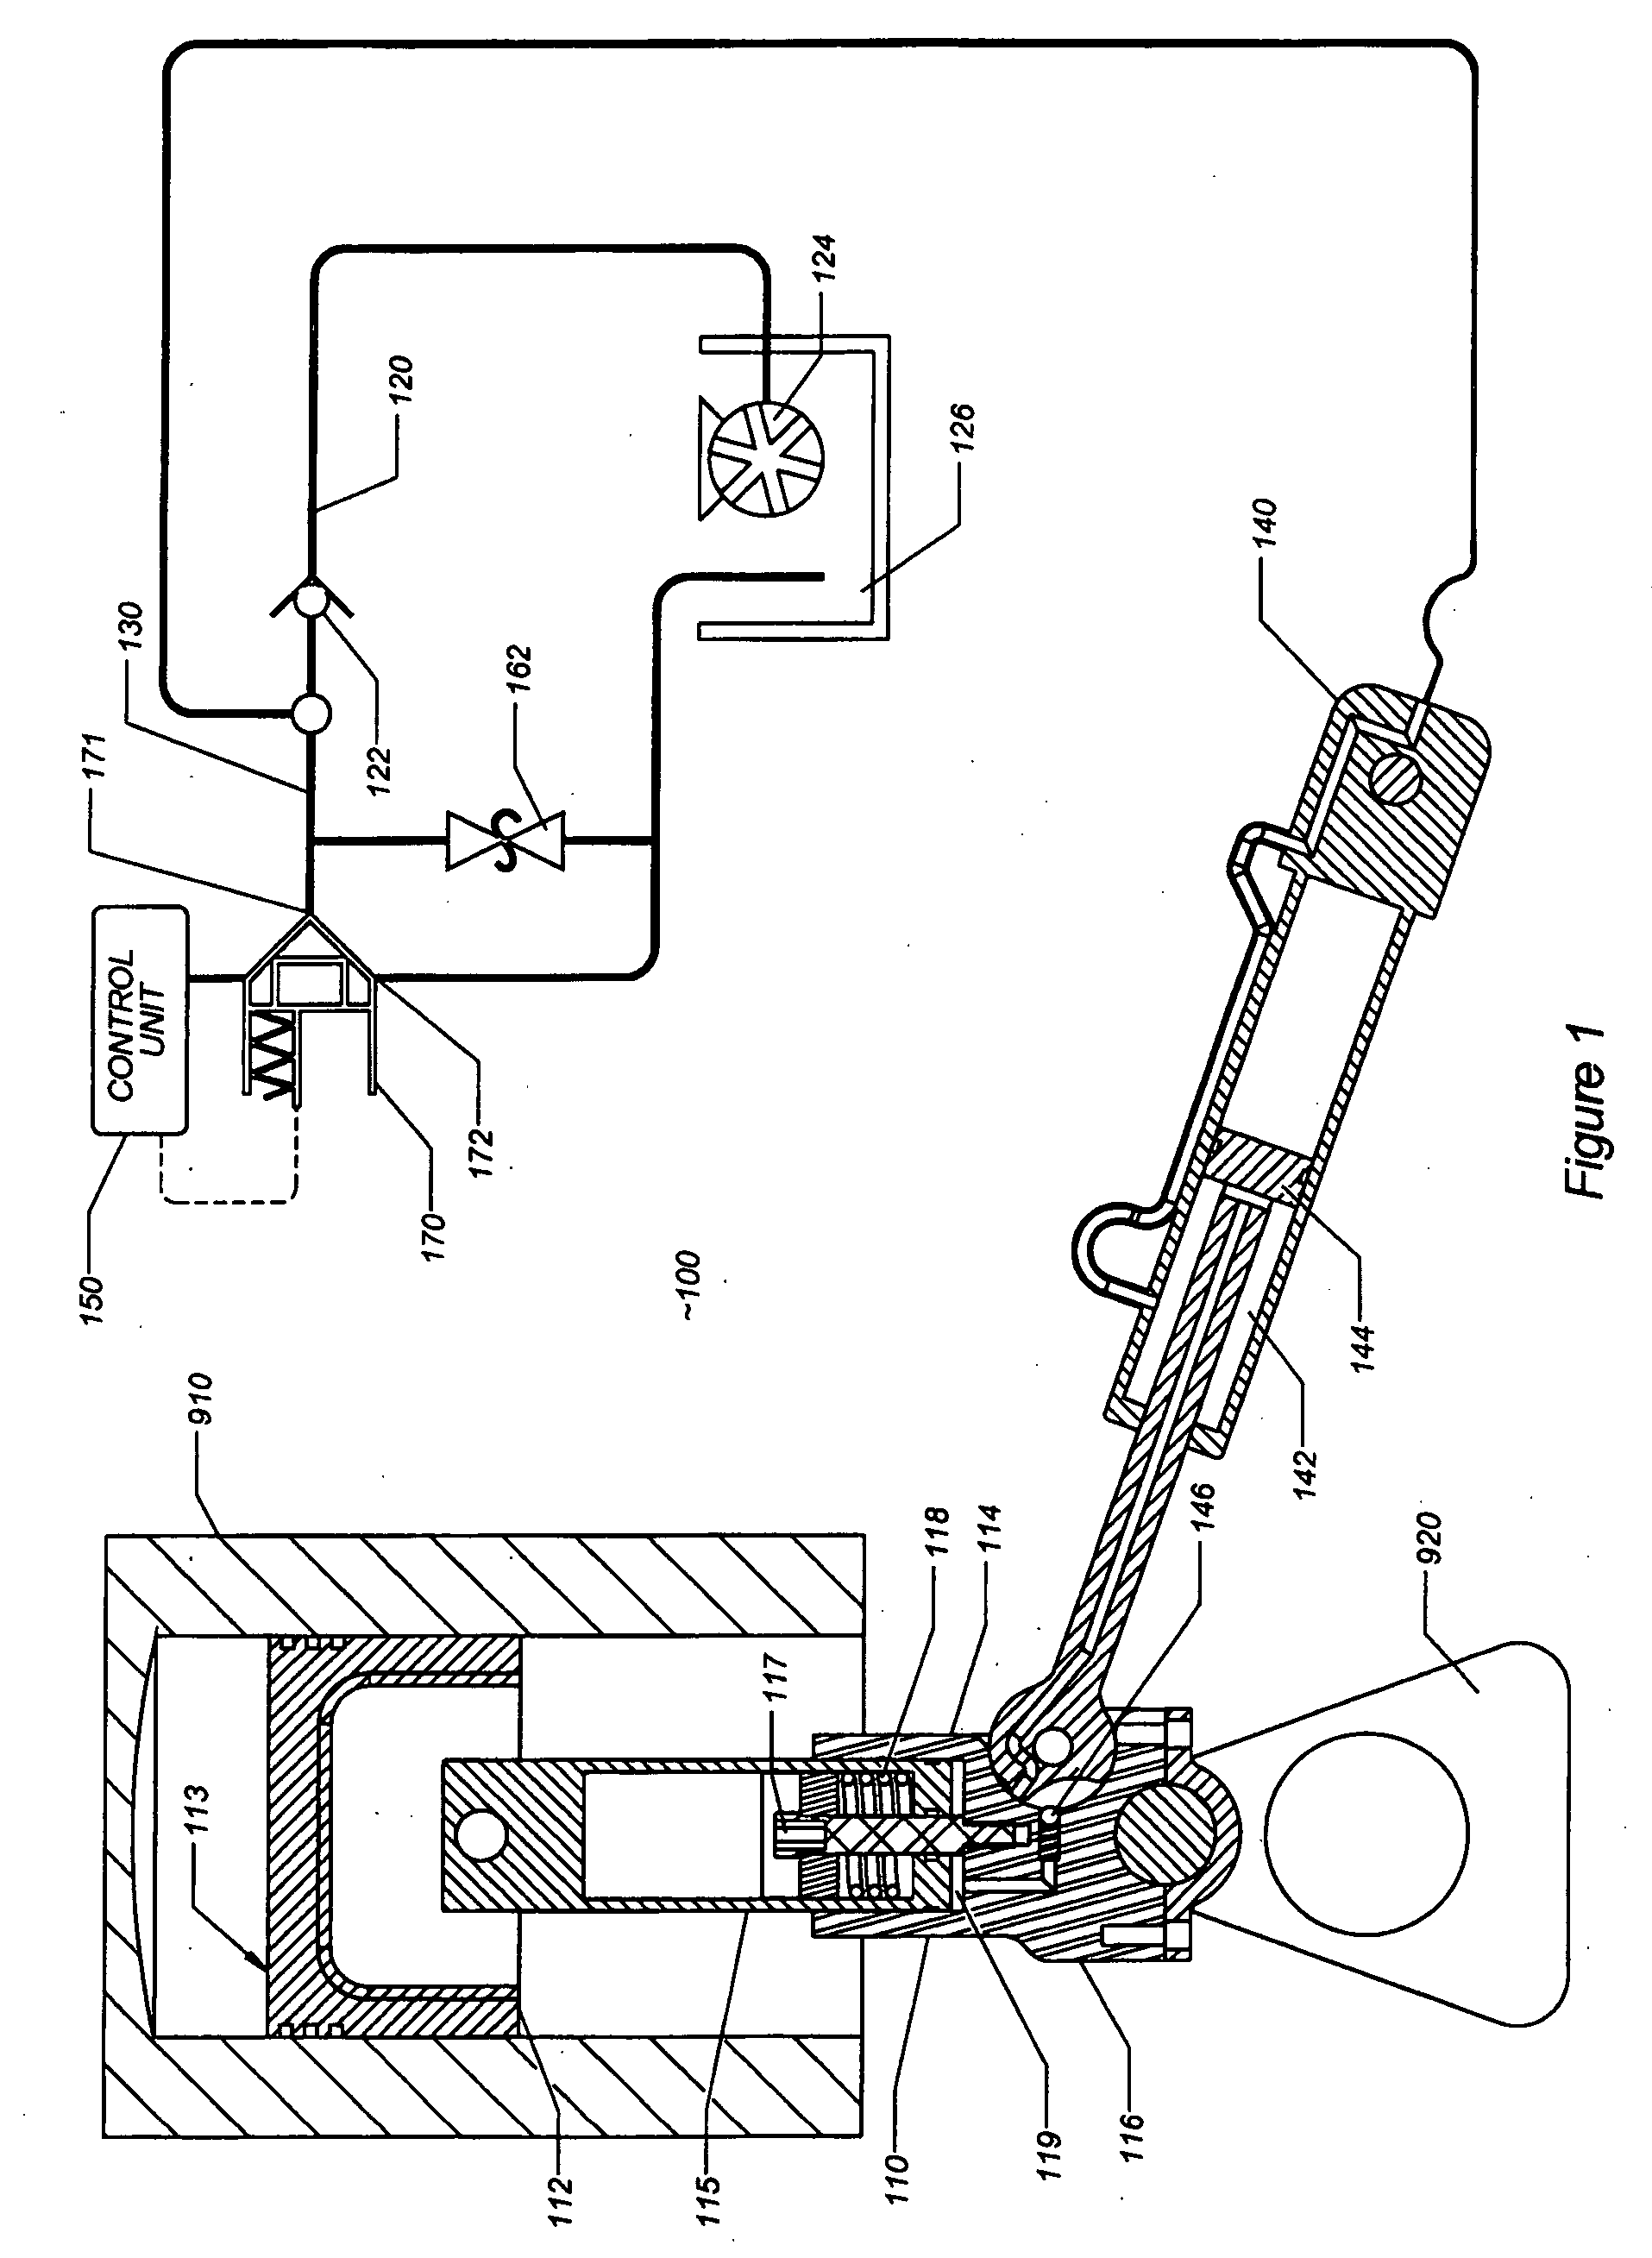 Variable compression ratio system